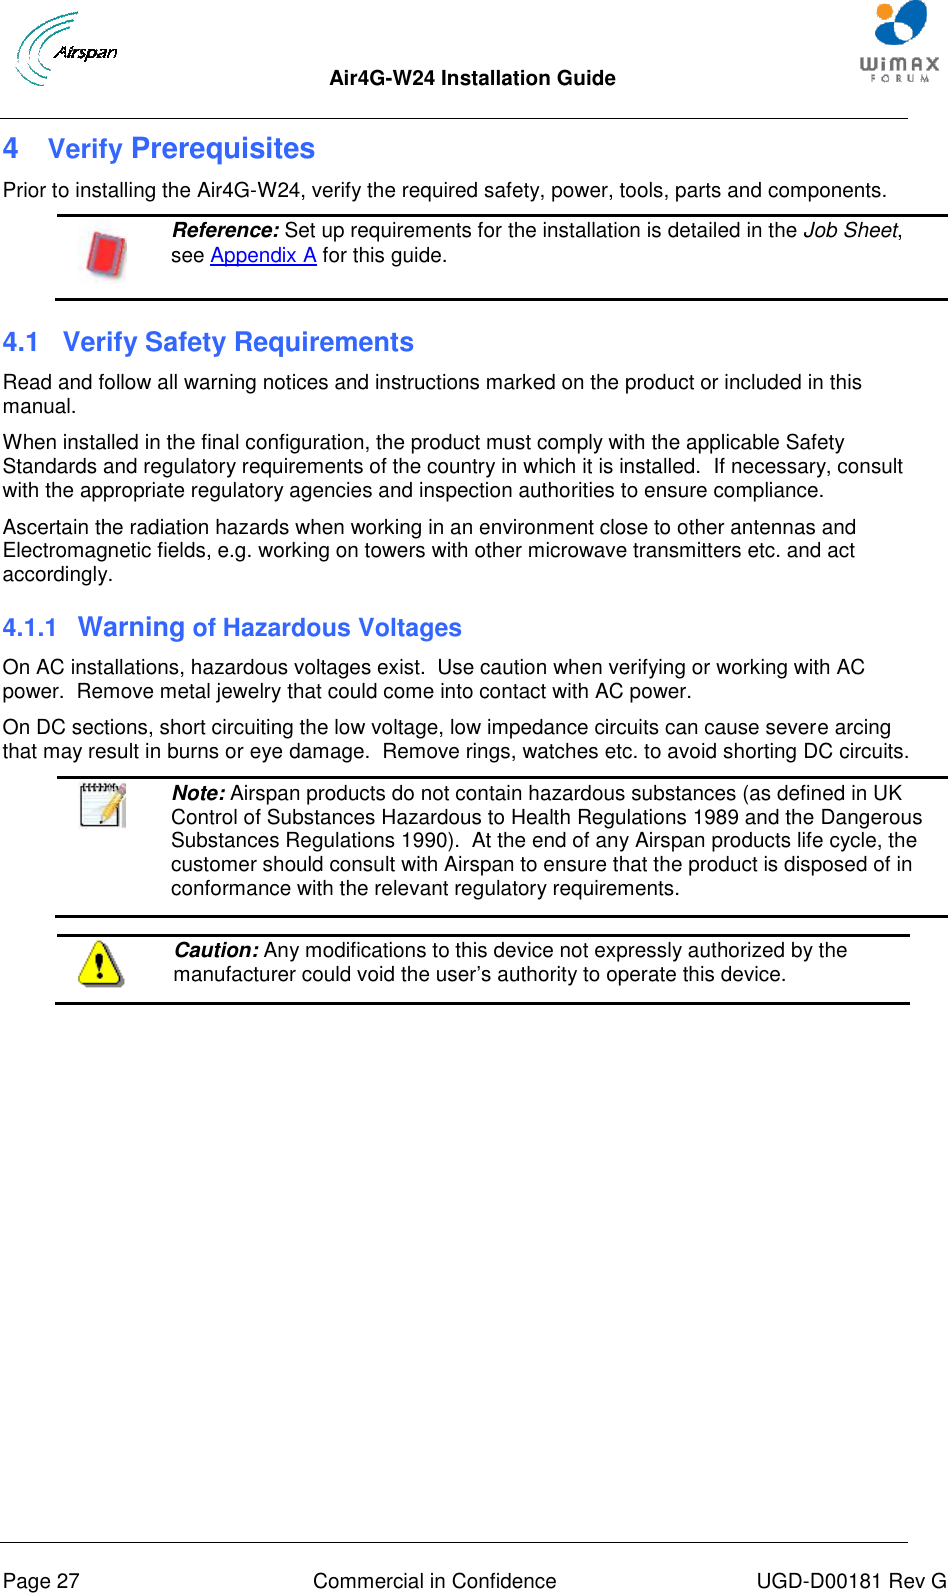  Air4G-W24 Installation Guide       Page 27  Commercial in Confidence  UGD-D00181 Rev G 4  Verify Prerequisites Prior to installing the Air4G-W24, verify the required safety, power, tools, parts and components.  Reference: Set up requirements for the installation is detailed in the Job Sheet, see Appendix A for this guide. 4.1  Verify Safety Requirements Read and follow all warning notices and instructions marked on the product or included in this manual. When installed in the final configuration, the product must comply with the applicable Safety Standards and regulatory requirements of the country in which it is installed.  If necessary, consult with the appropriate regulatory agencies and inspection authorities to ensure compliance. Ascertain the radiation hazards when working in an environment close to other antennas and Electromagnetic fields, e.g. working on towers with other microwave transmitters etc. and act accordingly. 4.1.1  Warning of Hazardous Voltages On AC installations, hazardous voltages exist.  Use caution when verifying or working with AC power.  Remove metal jewelry that could come into contact with AC power. On DC sections, short circuiting the low voltage, low impedance circuits can cause severe arcing that may result in burns or eye damage.  Remove rings, watches etc. to avoid shorting DC circuits.   Note: Airspan products do not contain hazardous substances (as defined in UK Control of Substances Hazardous to Health Regulations 1989 and the Dangerous Substances Regulations 1990).  At the end of any Airspan products life cycle, the customer should consult with Airspan to ensure that the product is disposed of in conformance with the relevant regulatory requirements.   Caution: Any modifications to this device not expressly authorized by the manufacturer could void the user‟s authority to operate this device.  